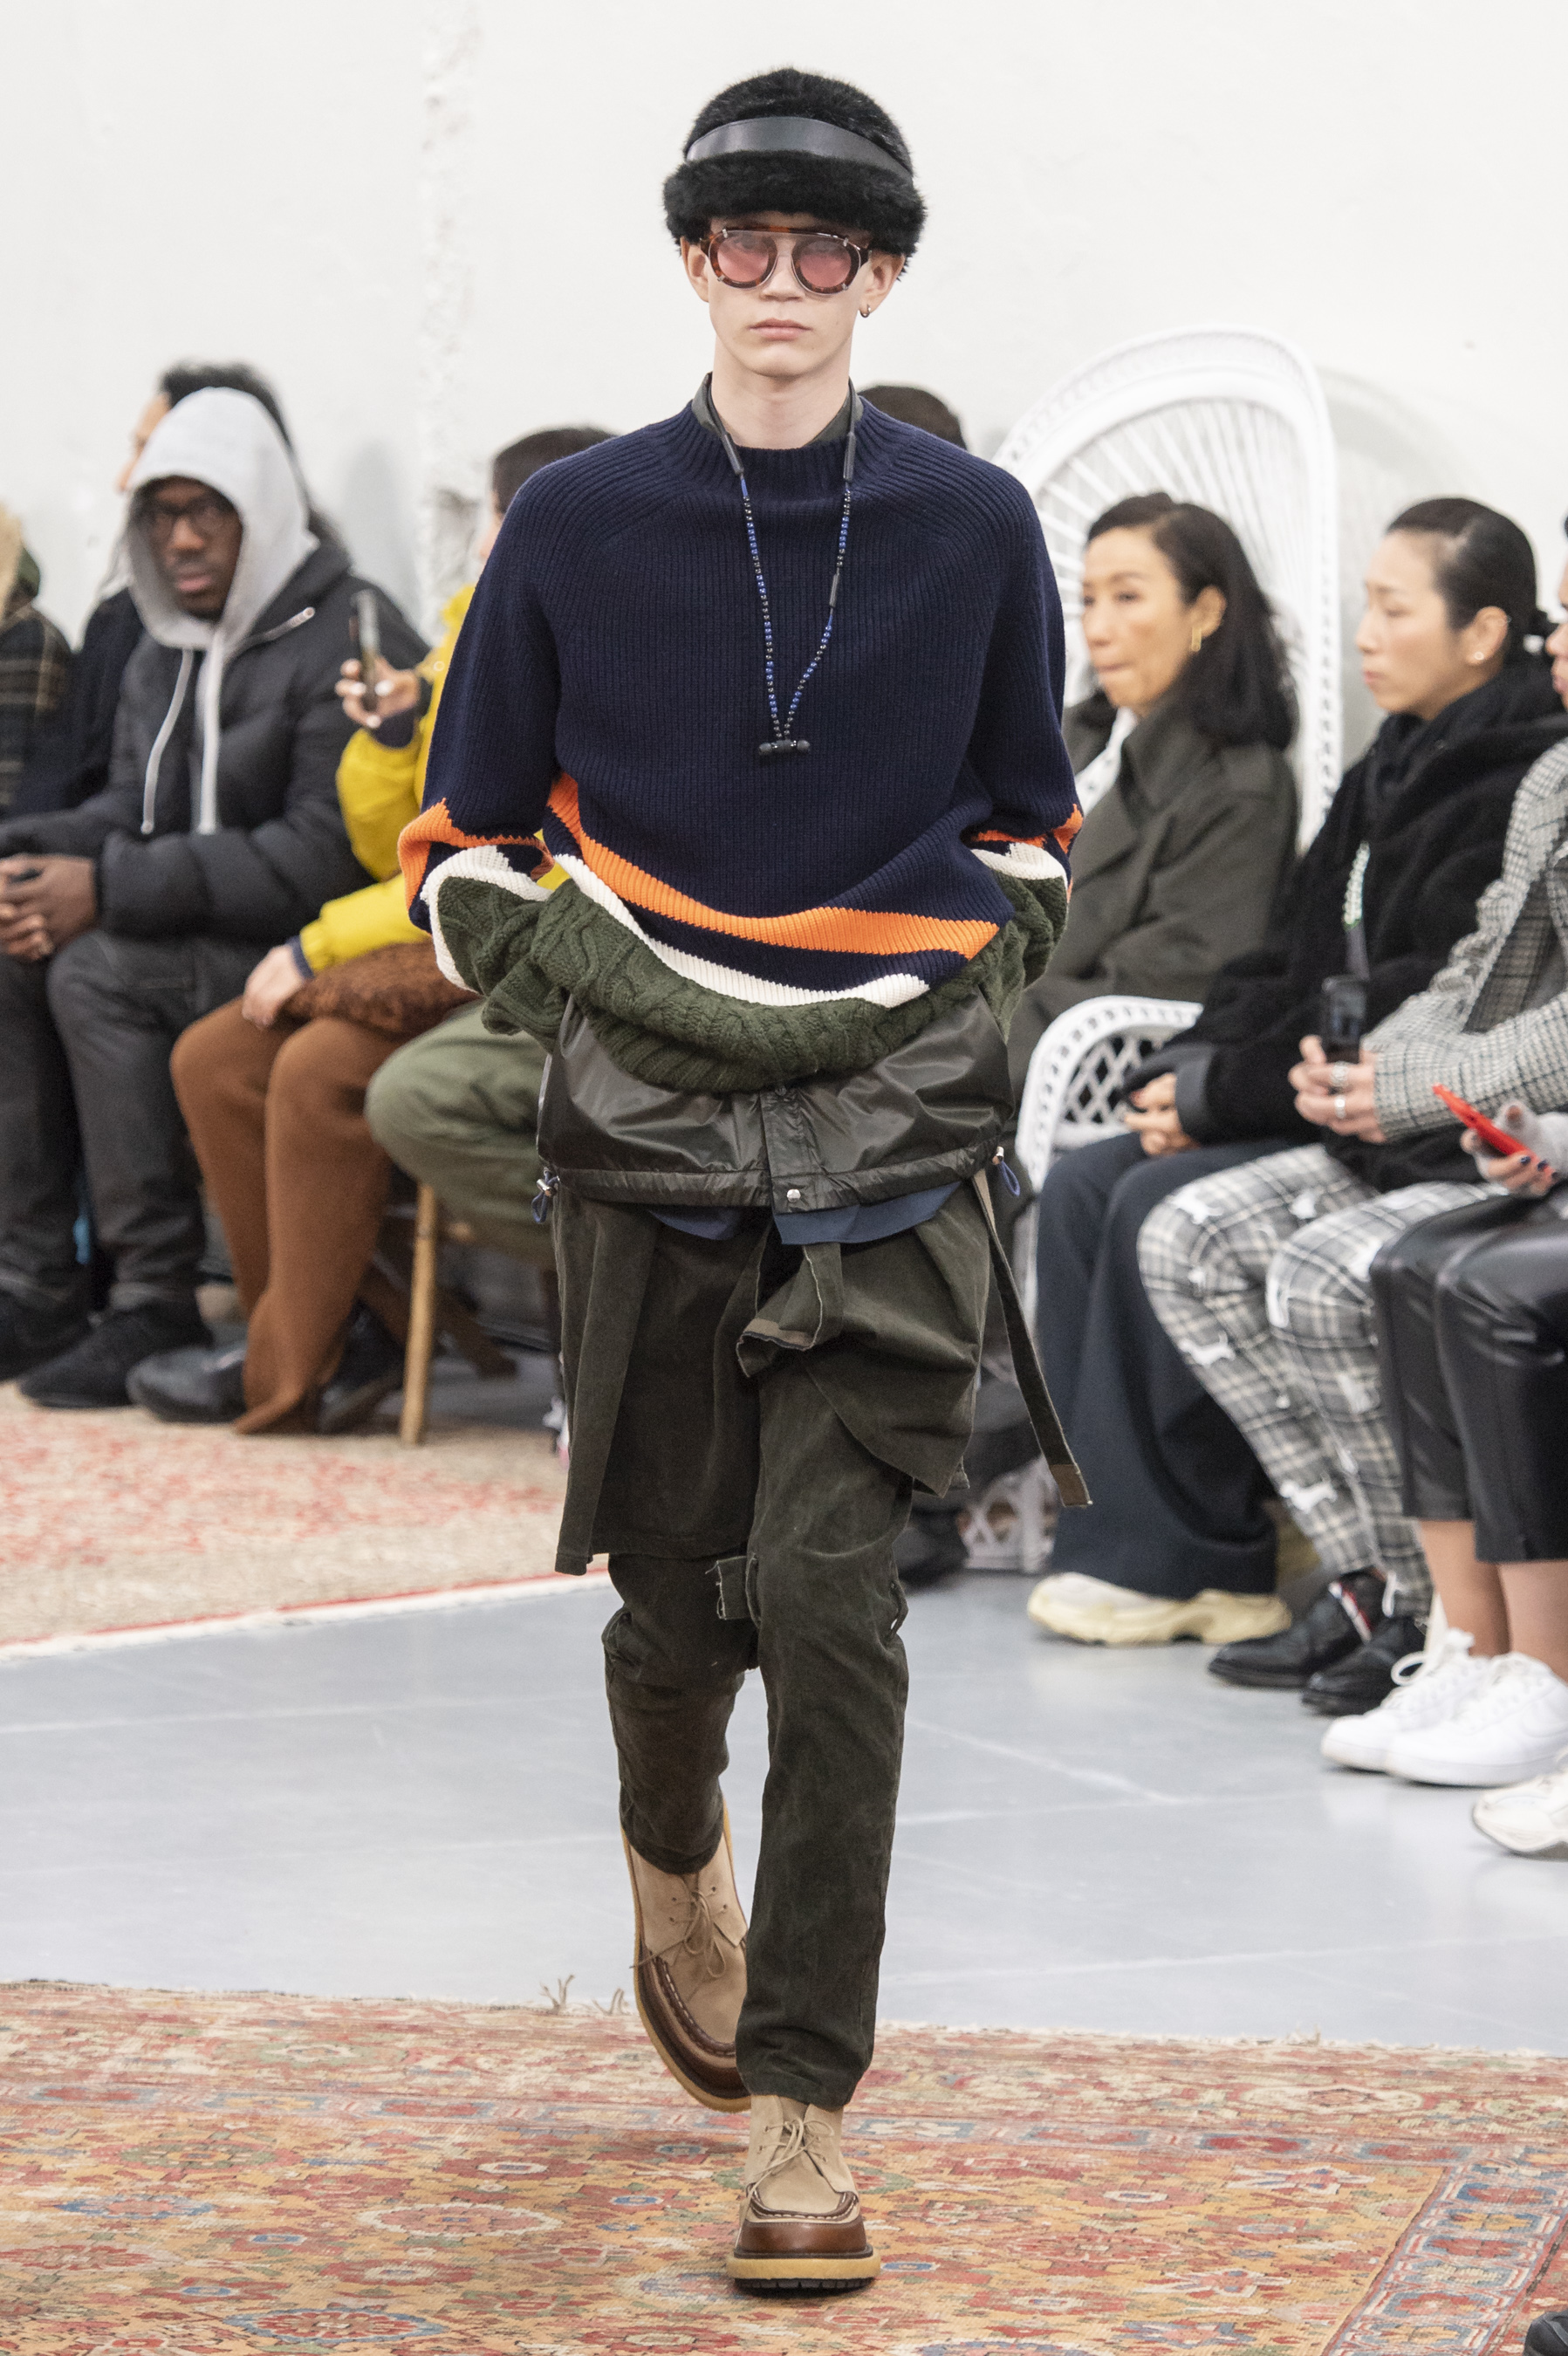 Top 10 Fall 2019 Men's Fashion Shows | The Impression